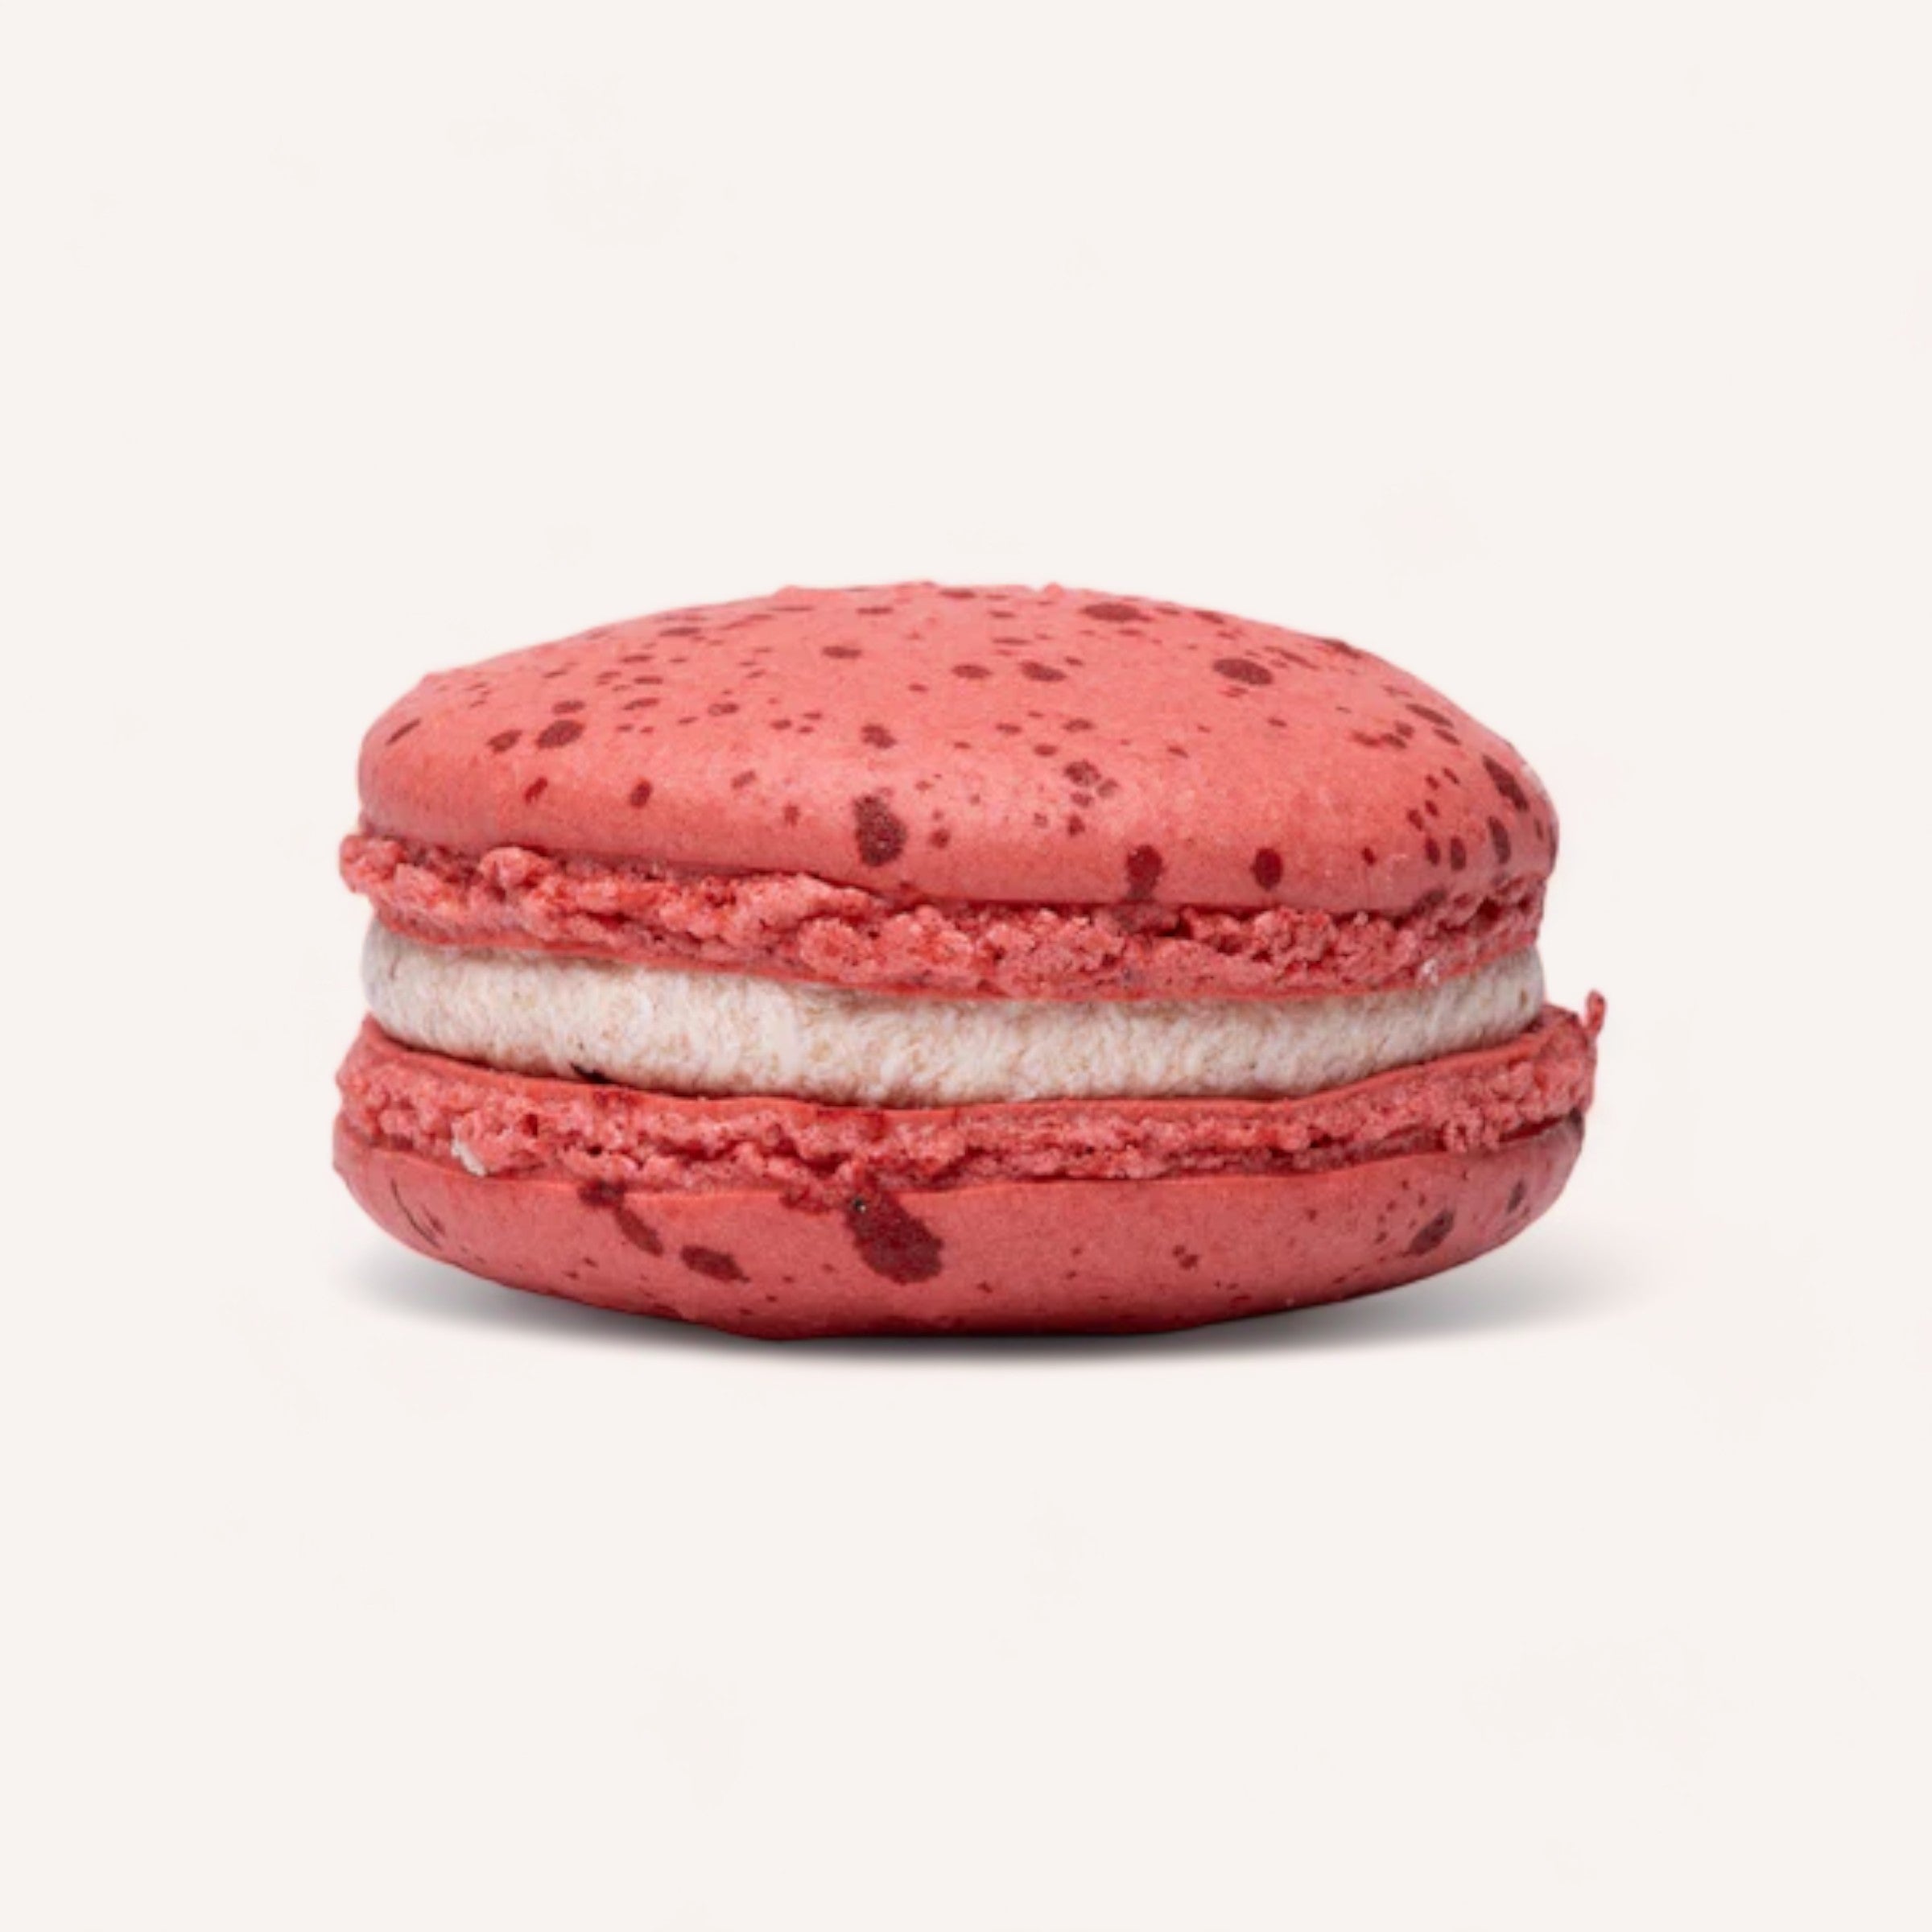 A vibrant red handmade Box of 6 Macarons by J'aime les Macarons with a creamy filling, showing its delicate texture and inviting appearance.